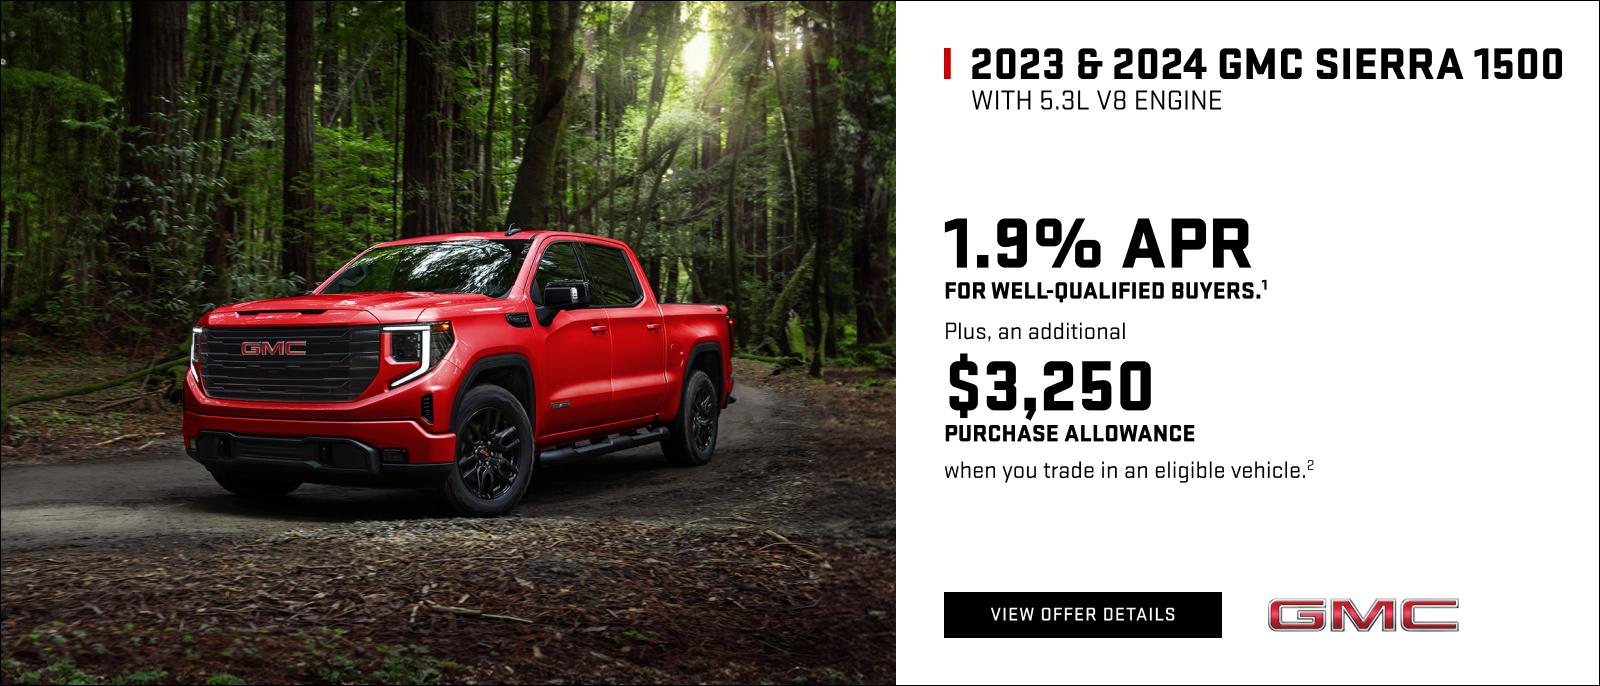 1.9% APR for well-qualified buyers.1

Plus, an additional $3,250 PURCHASE ALLOWANCE when you trade in an eligible vehicle.2